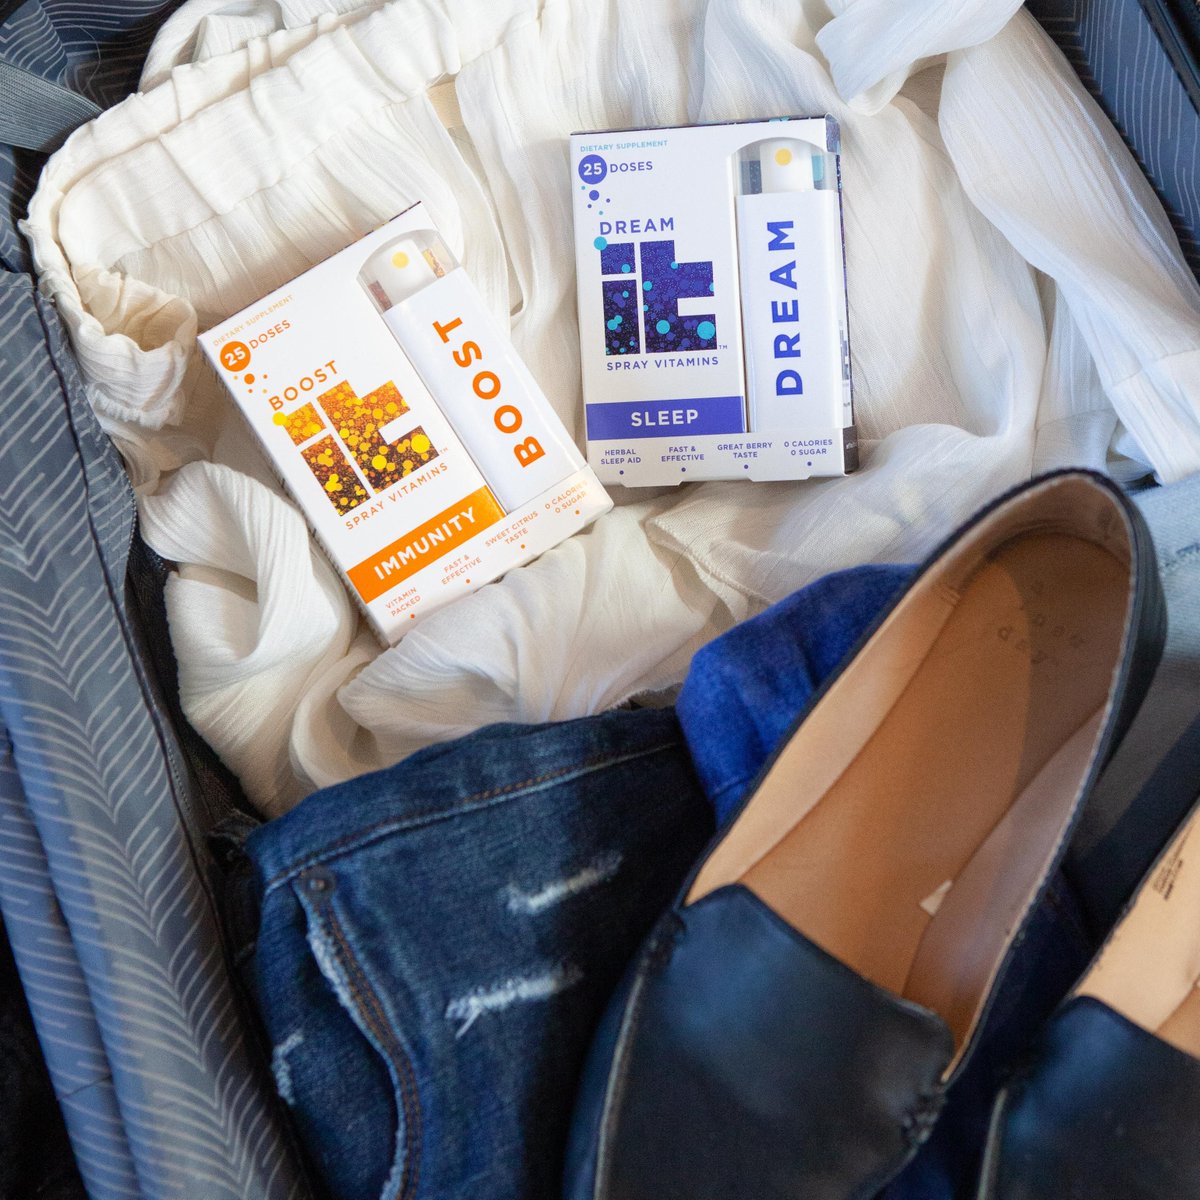 The perfect travel pair, #DREAMit and #BOOSTit